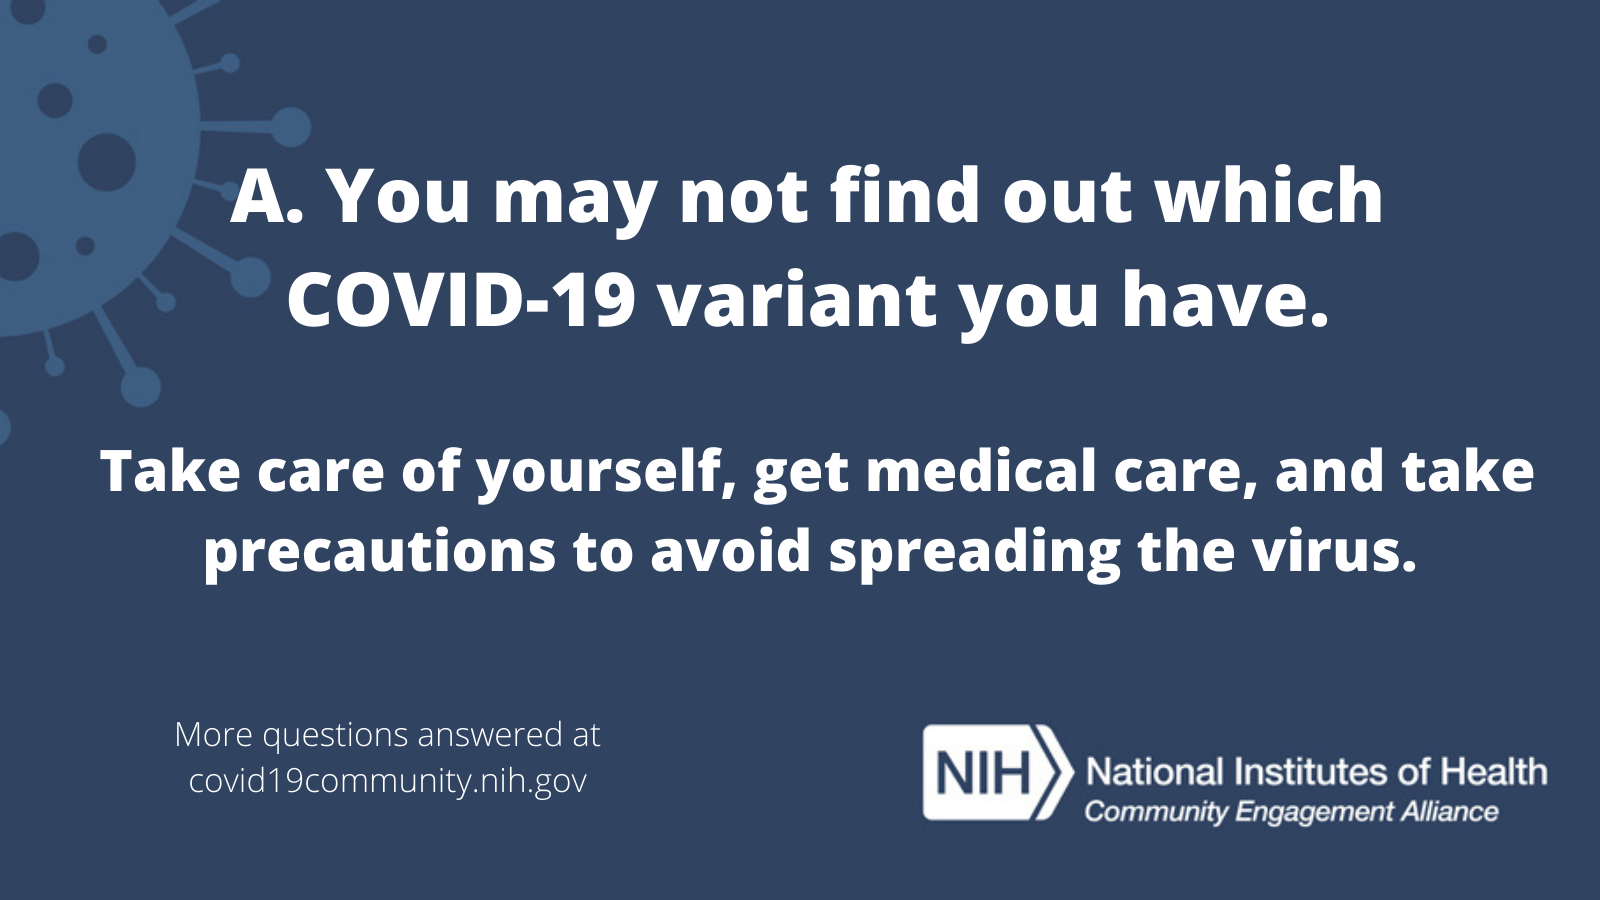 A. You may not find out which COVID-19 variant you have. Take care of yourself, get medical care, and take precautions to avoid spreading the virus. More vaccine questions answered at covid19community.nih.gov